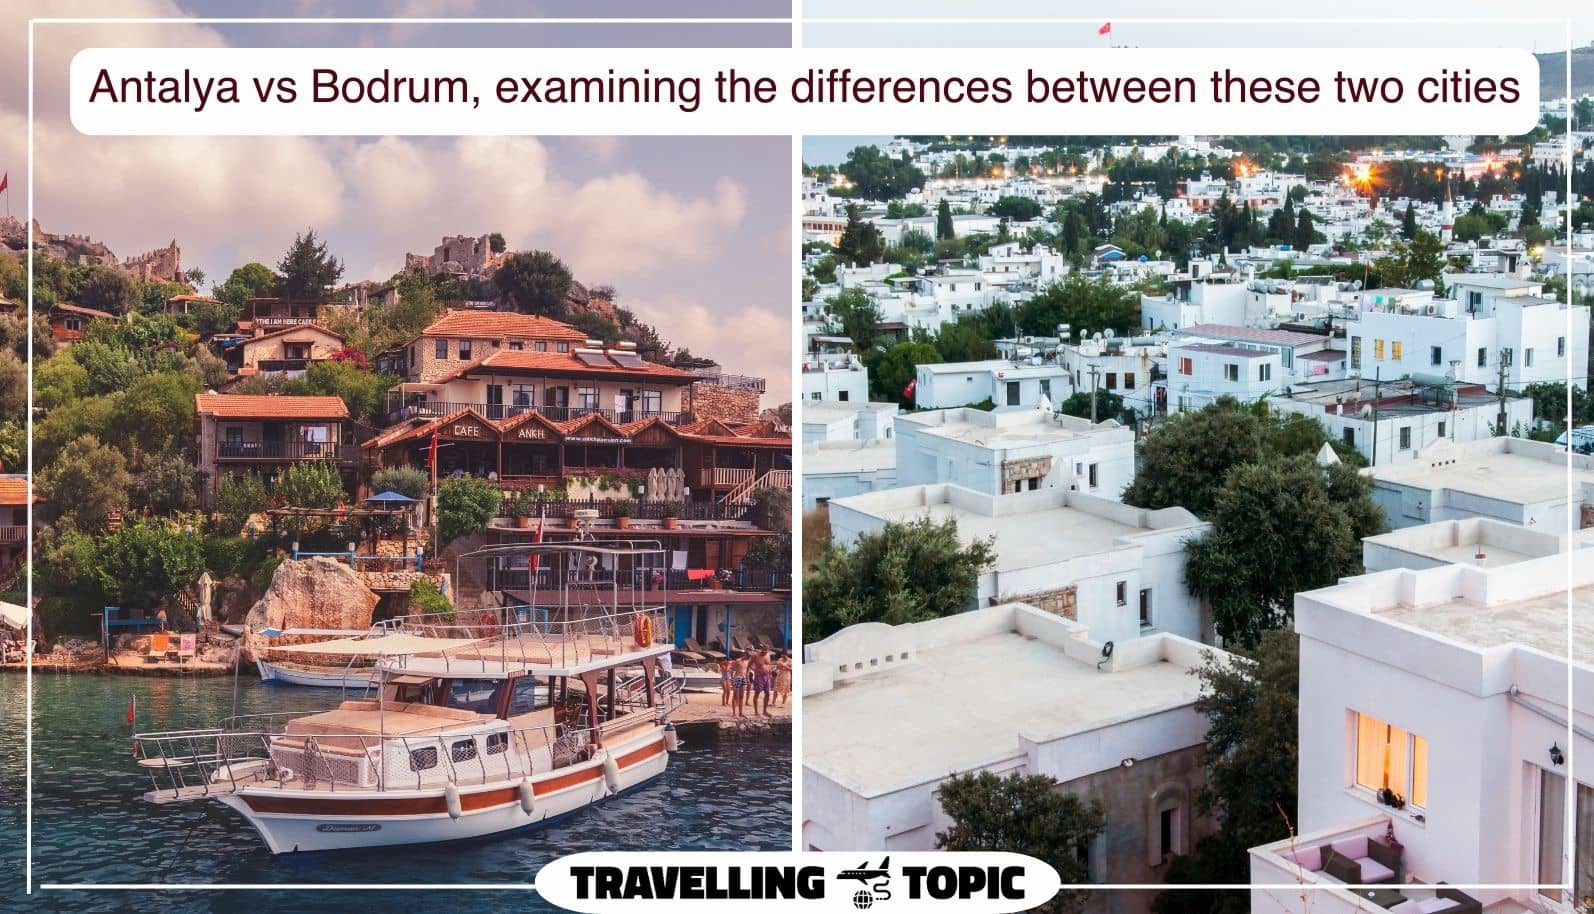 Antalya vs Bodrum, examining the differences between these two cities